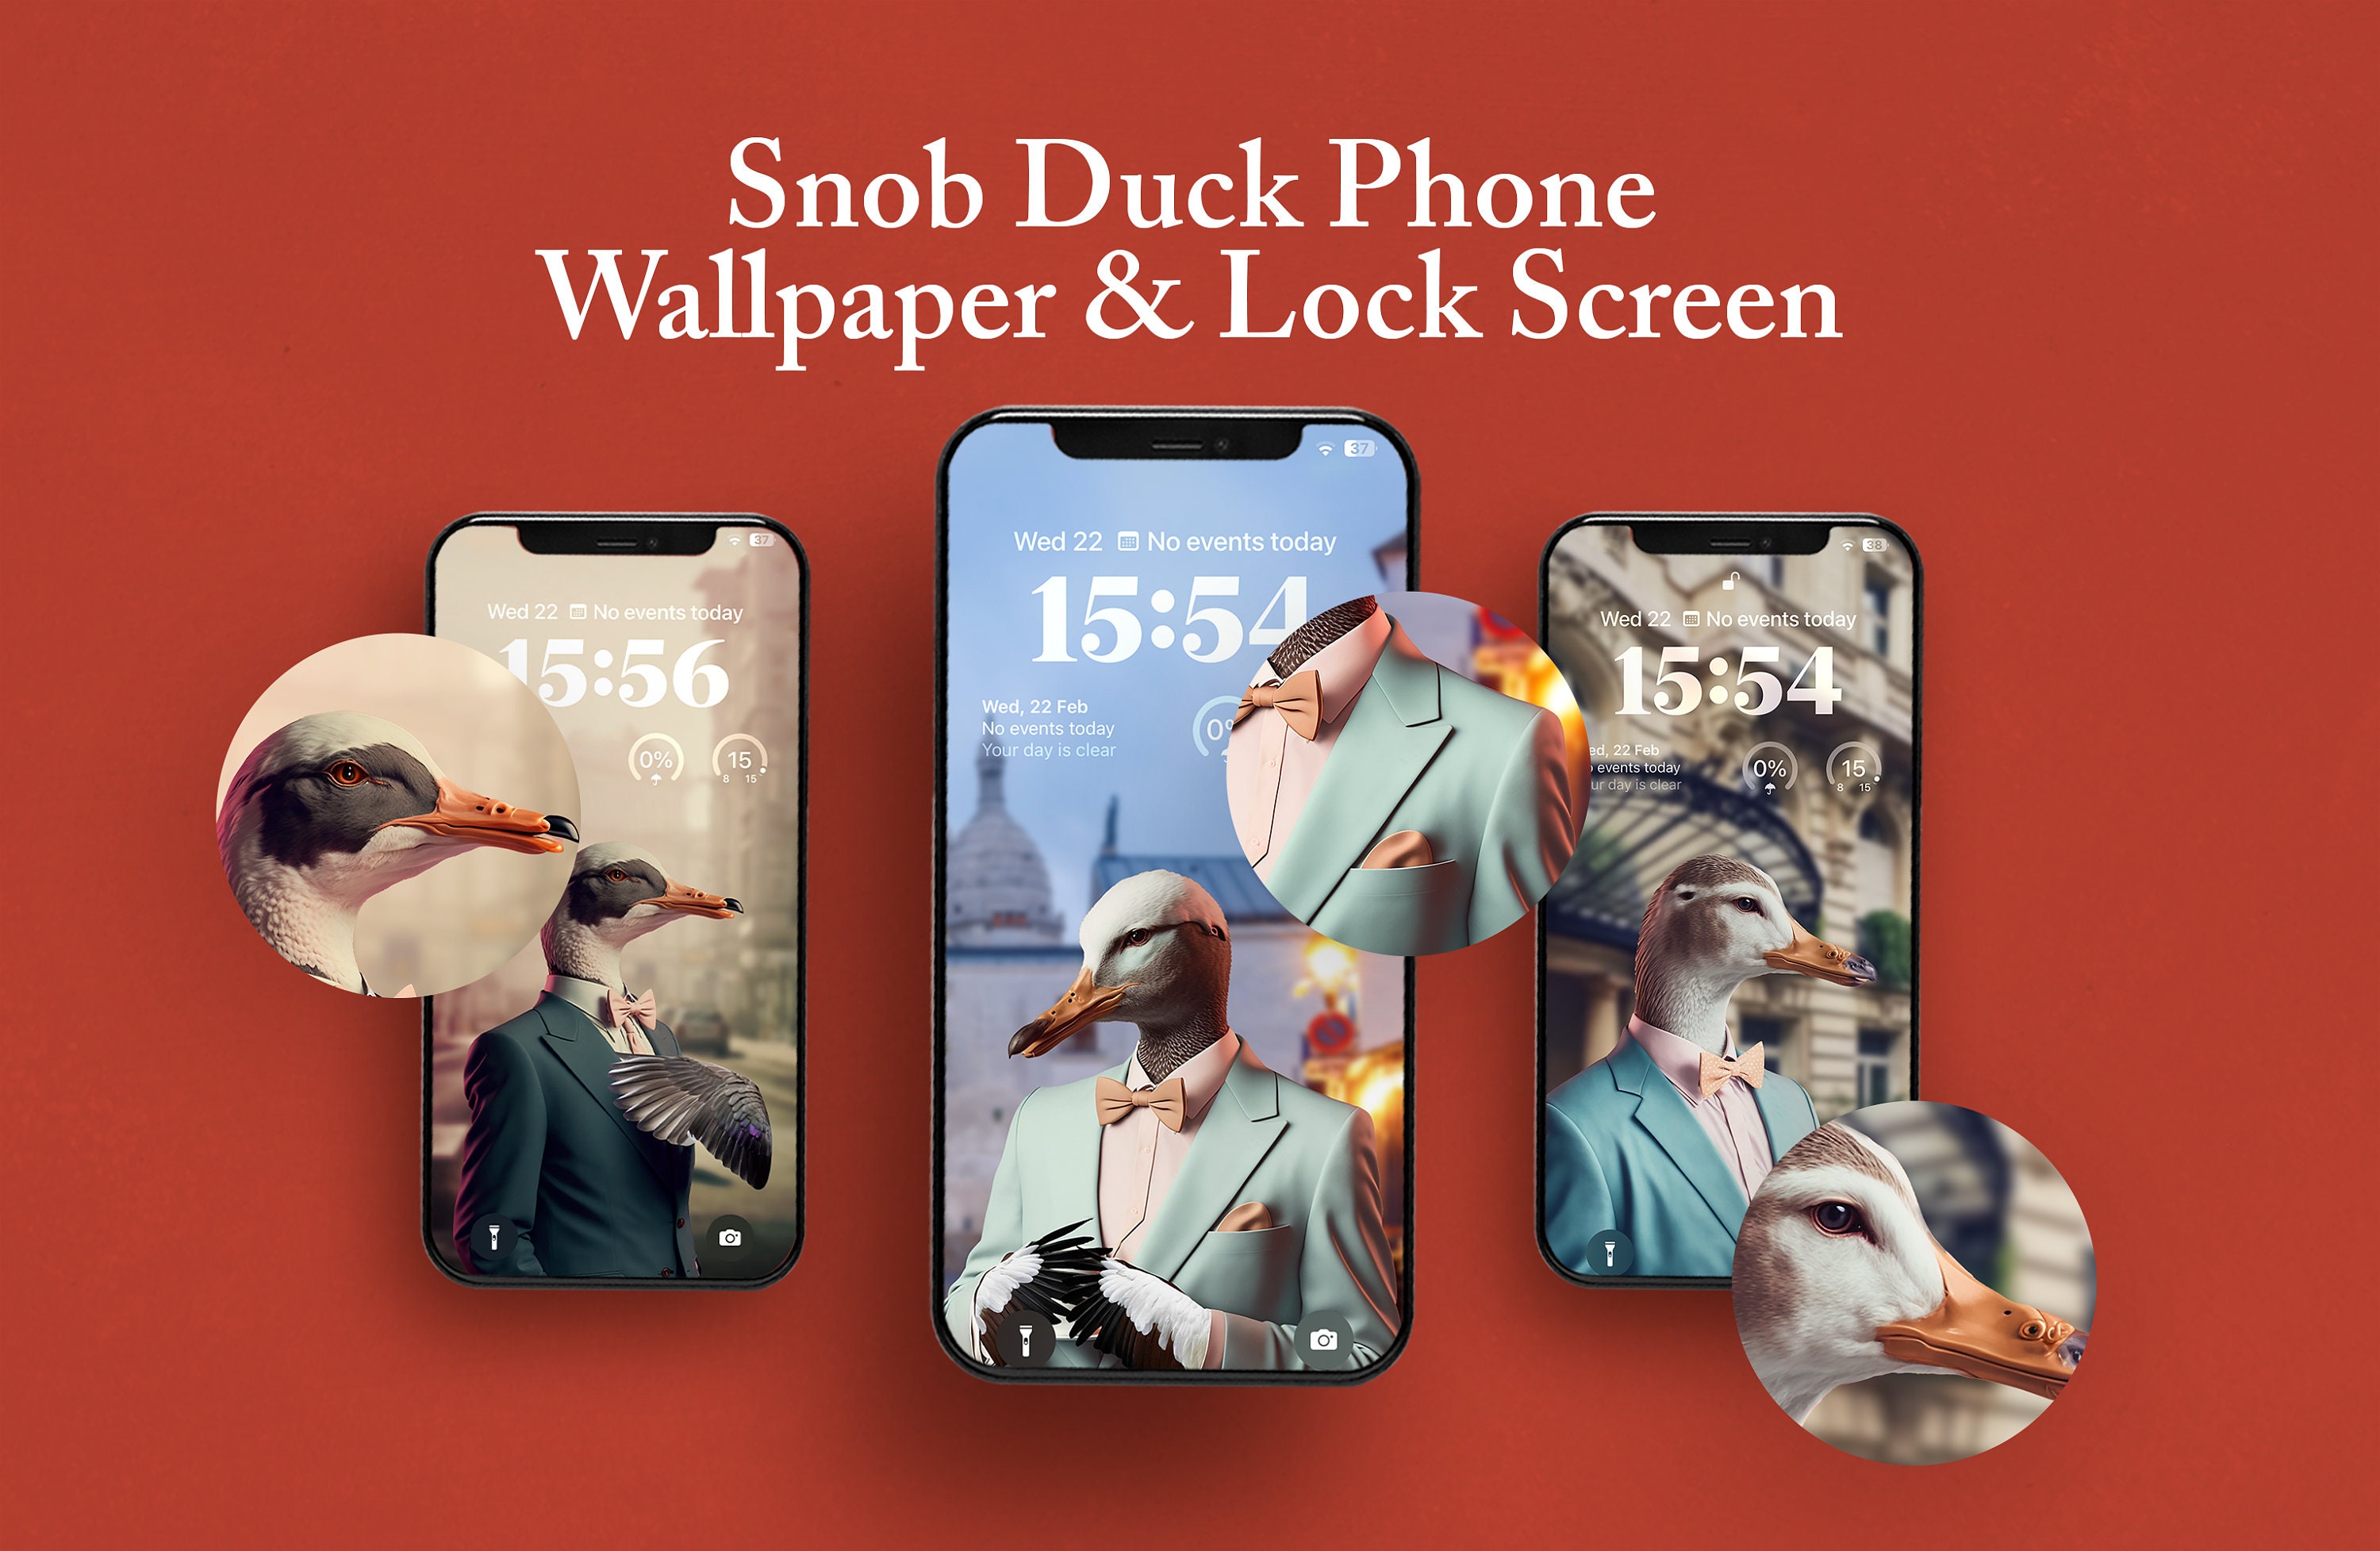 20+ Funny iPhone Wallpapers for iPhone 6s/6/5s/5